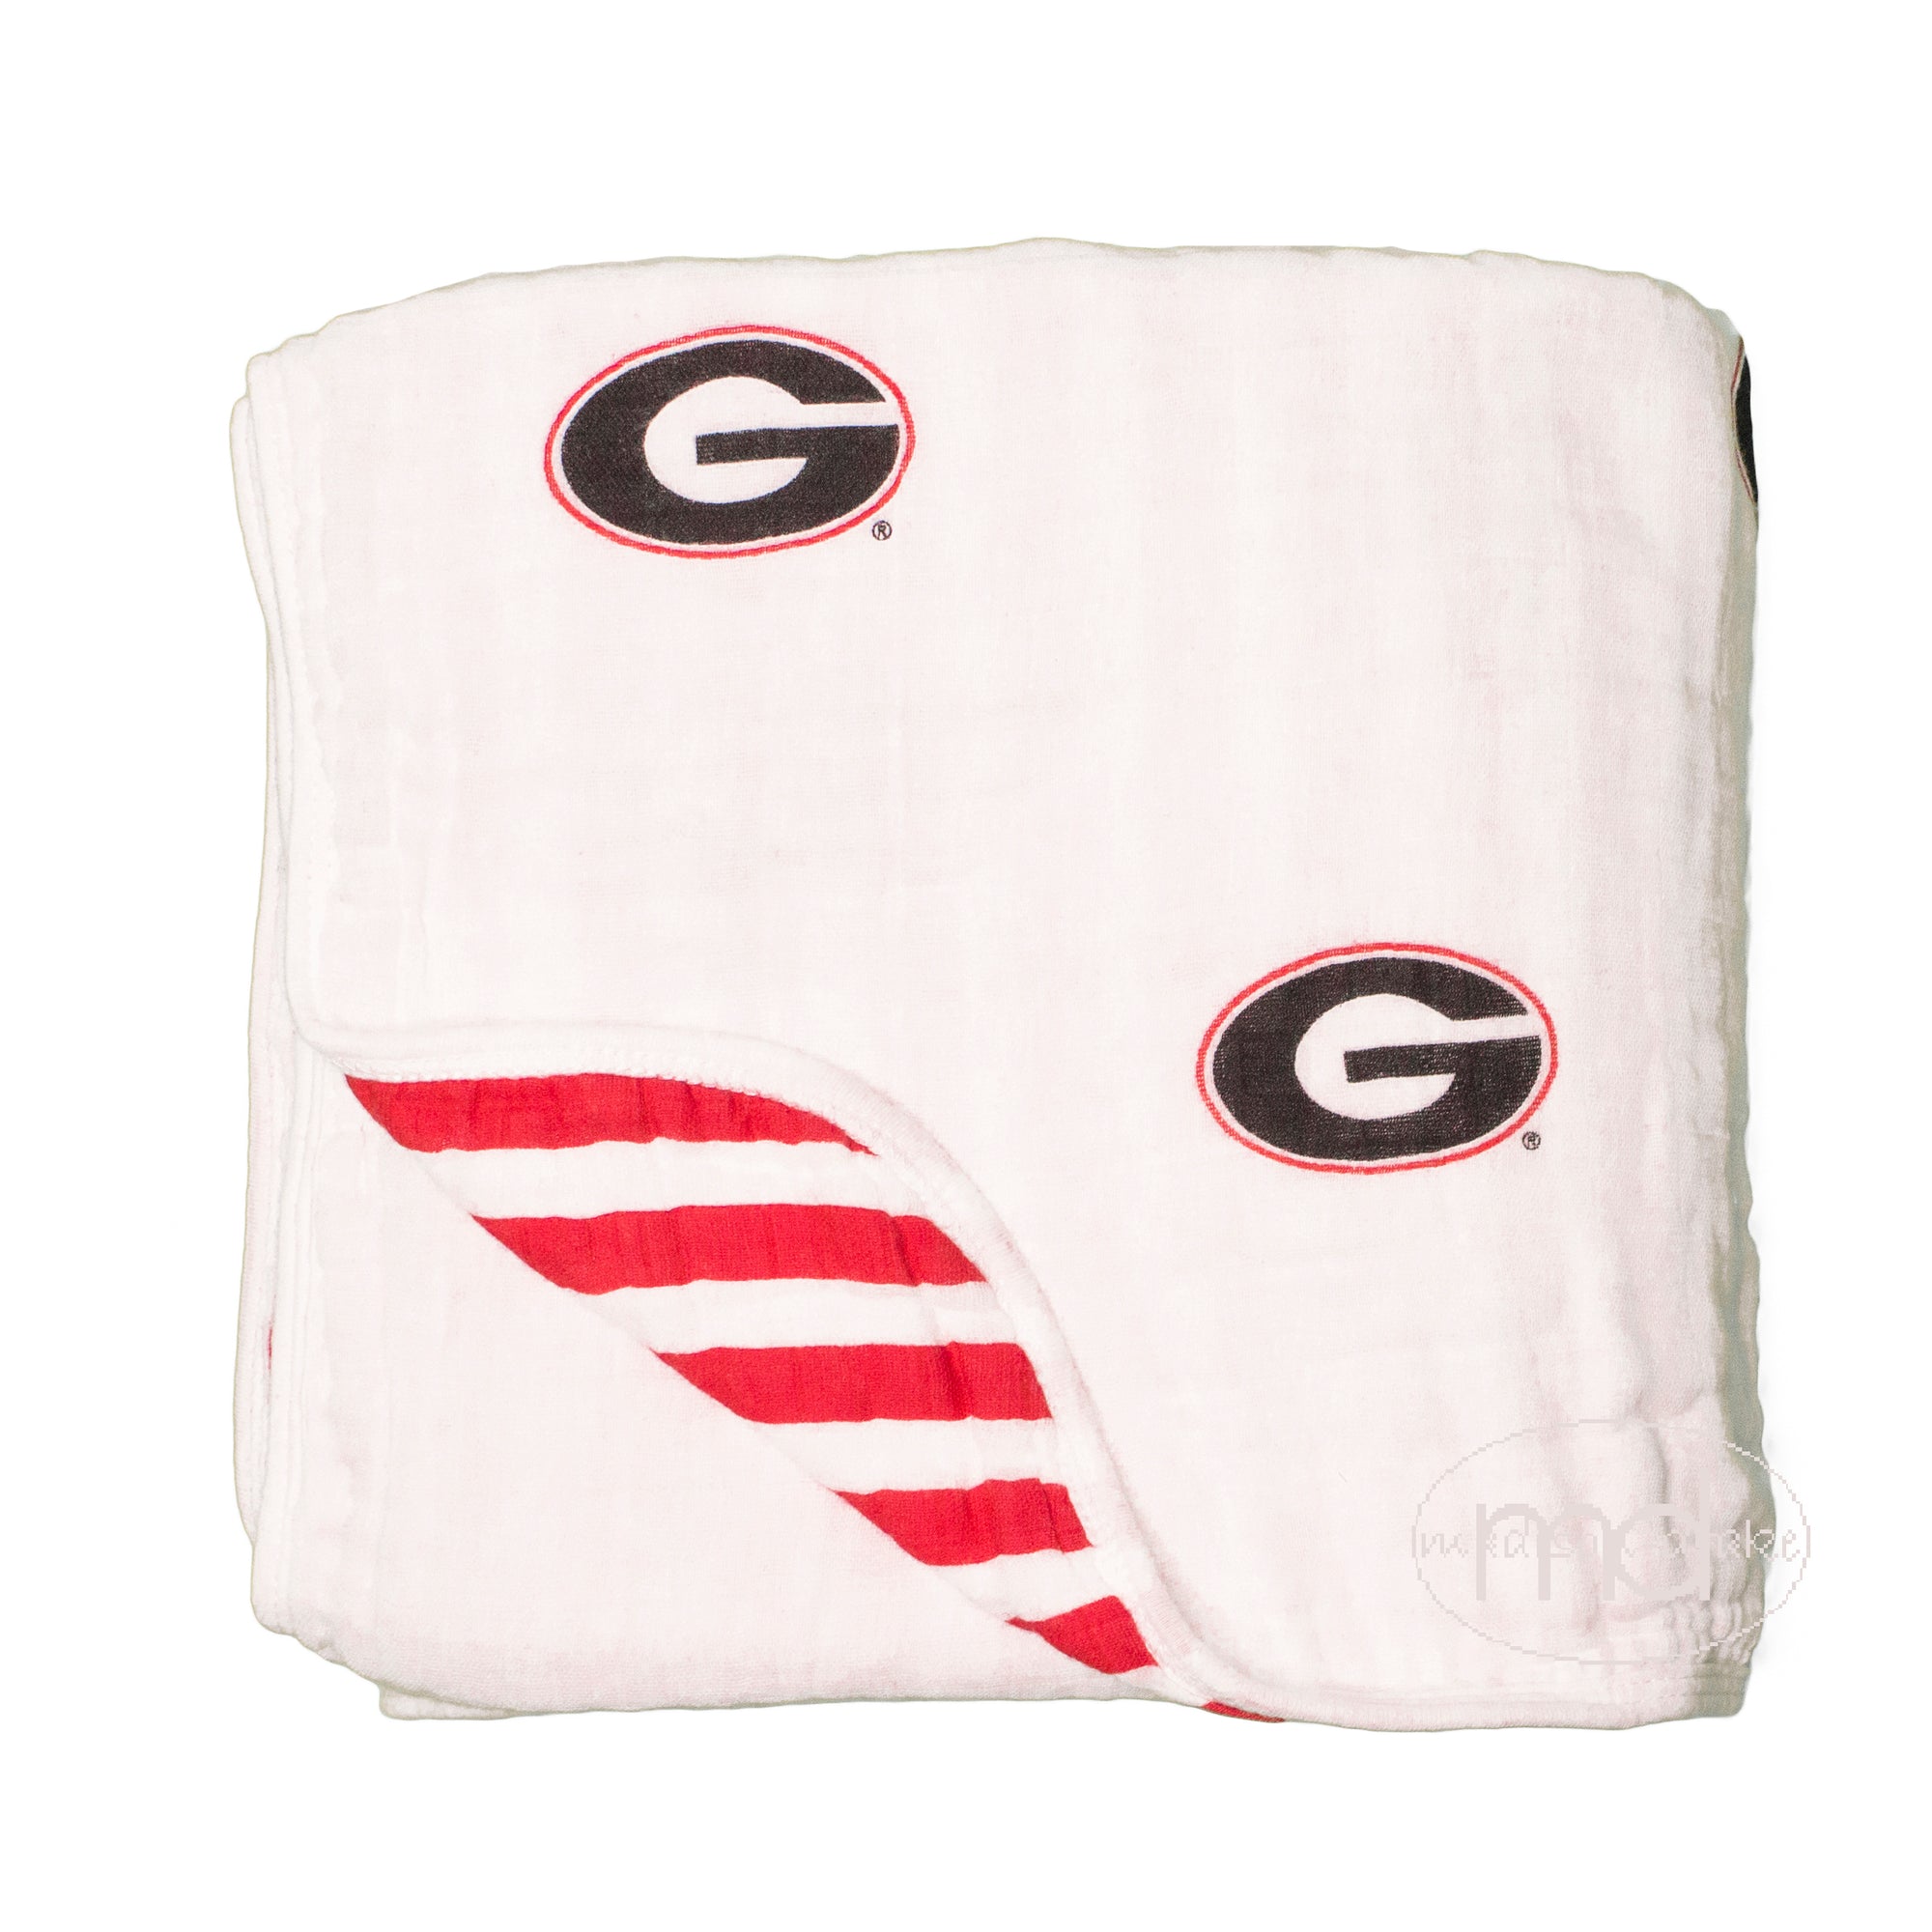 Officially Licensed University of Georgia Cotton Muslin Quilt